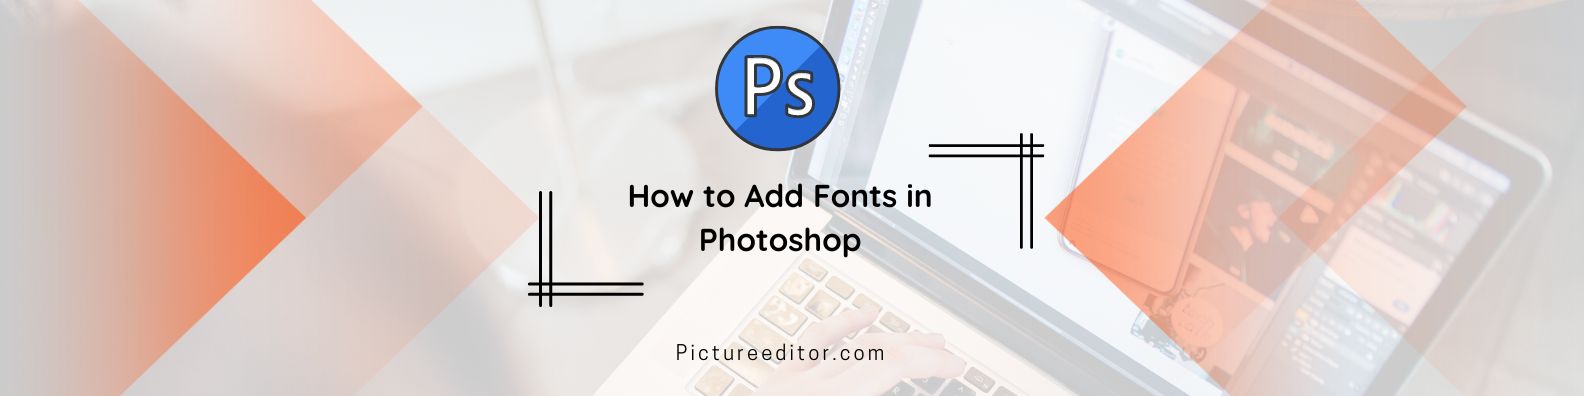 How to Add Fonts in Photoshop